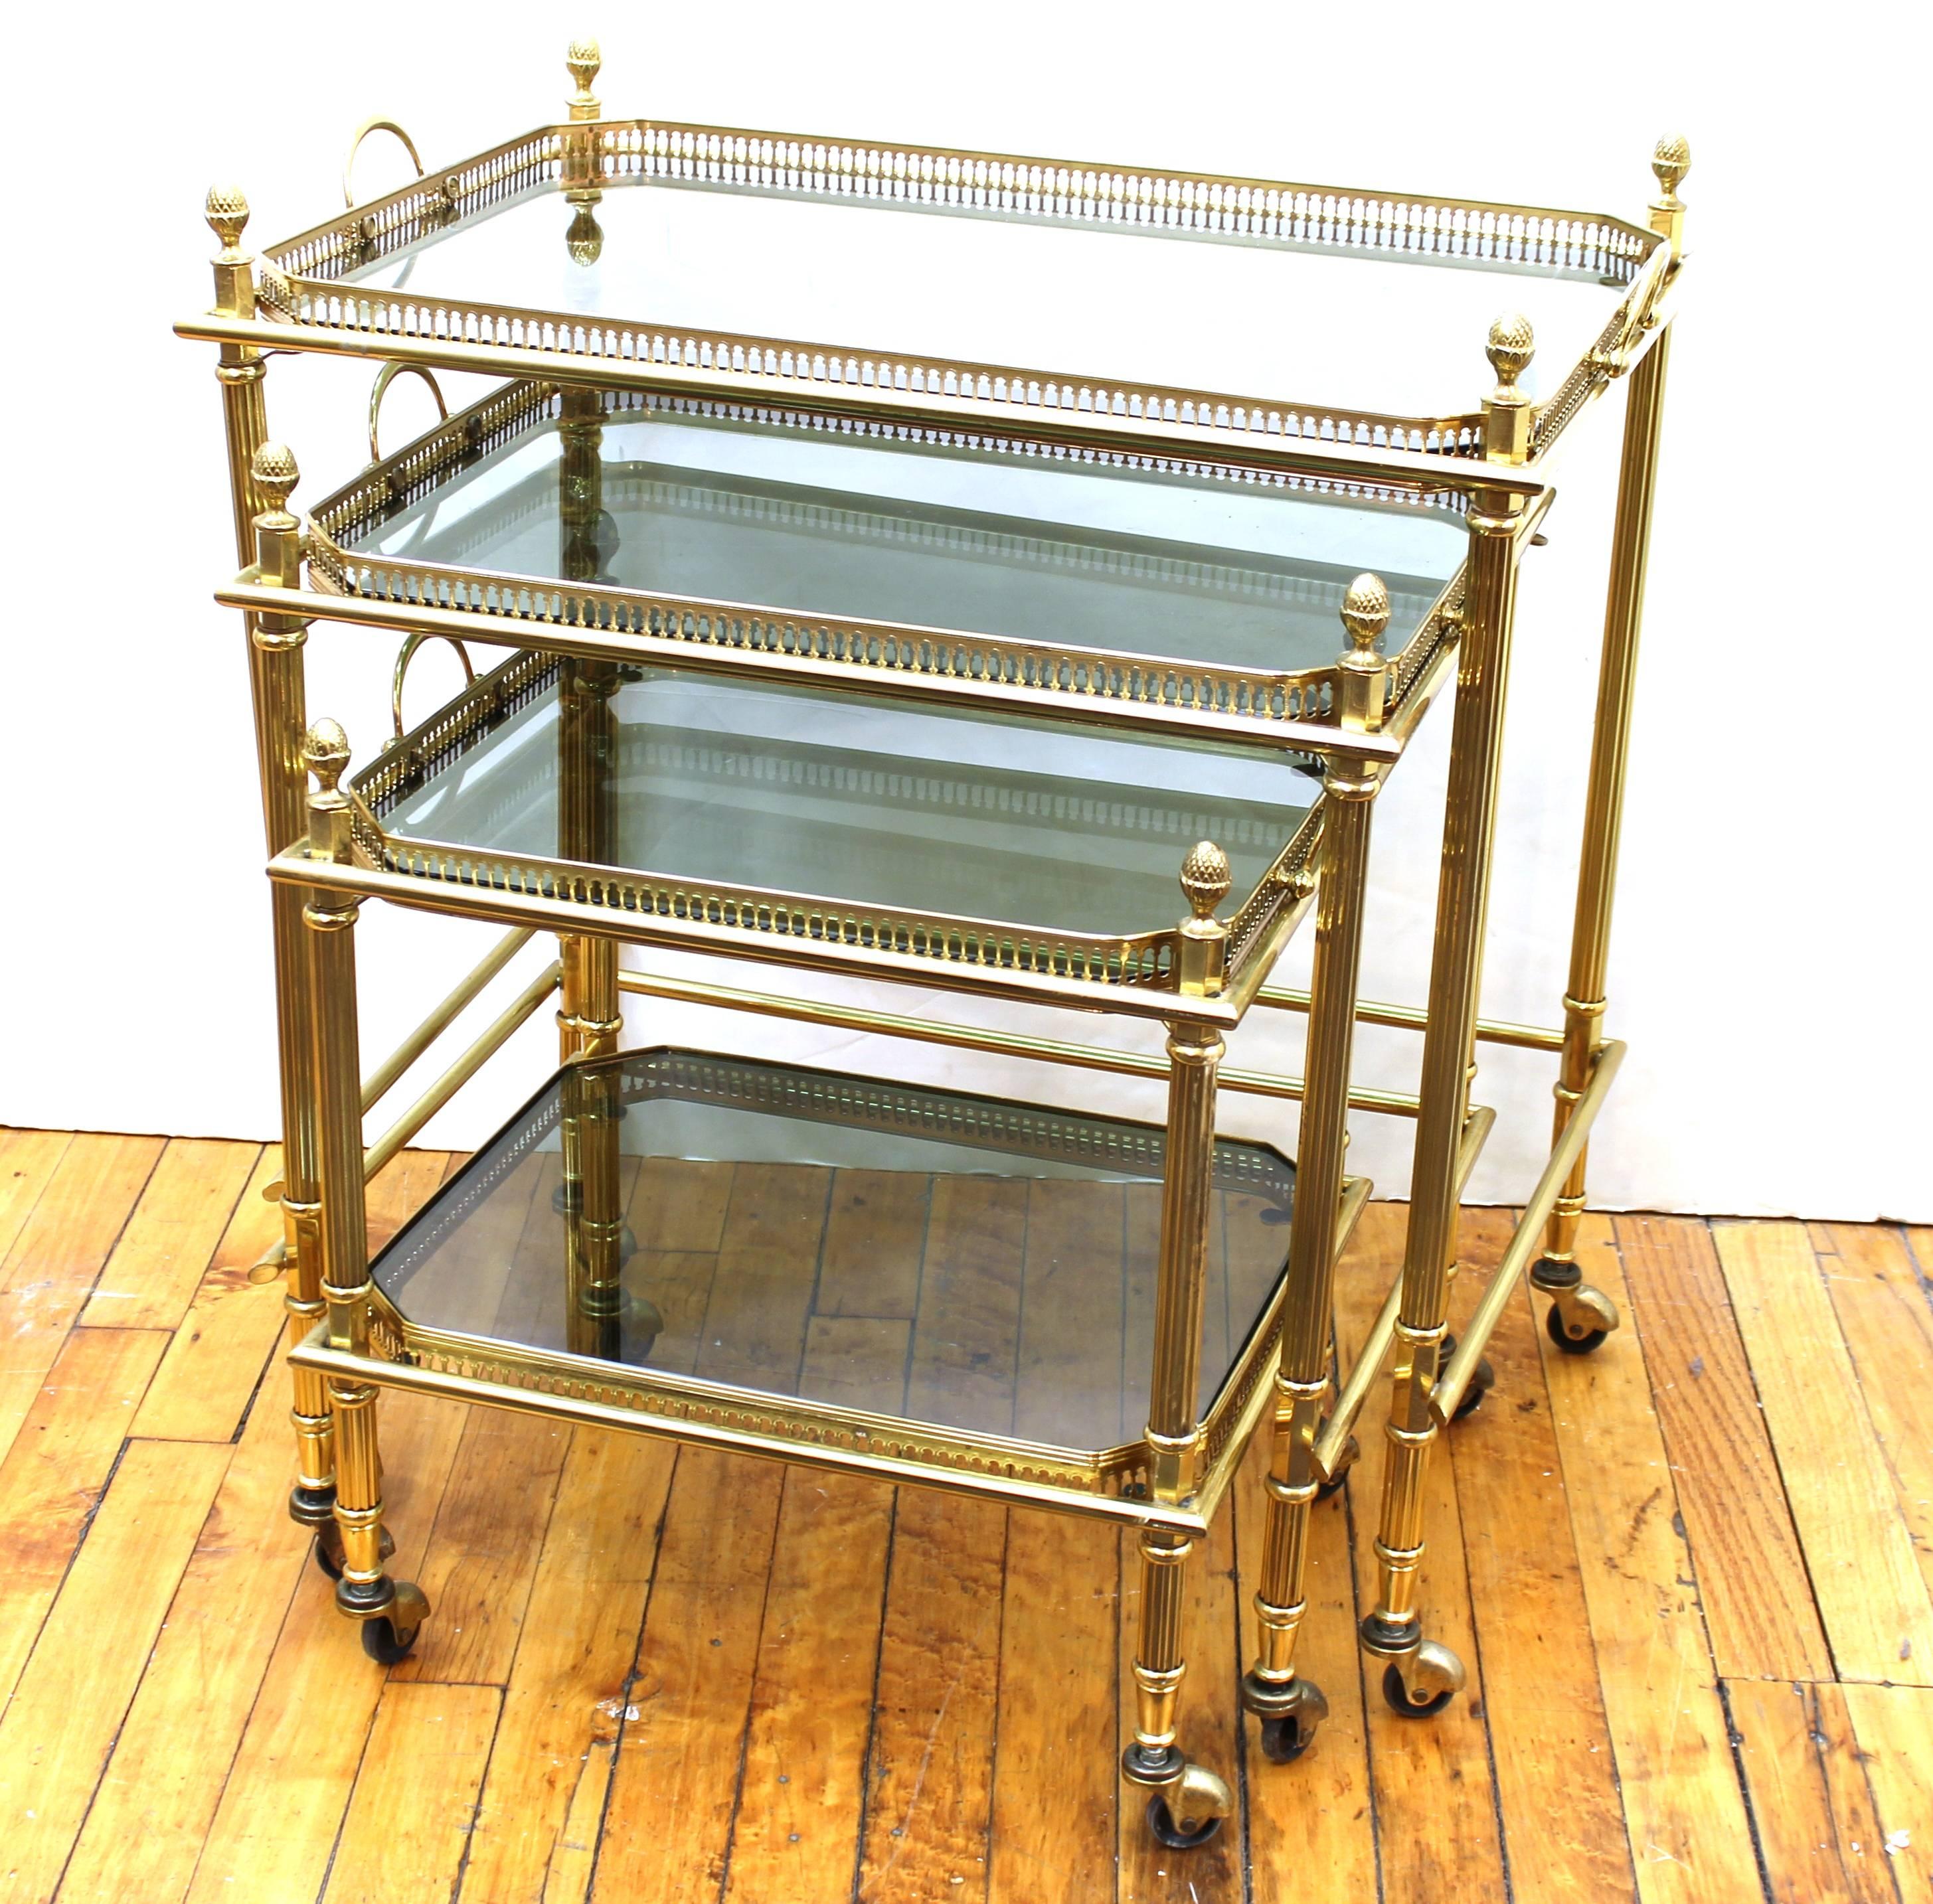 Maison Baguès nesting tables from the mid-20th century on casters. Featuring polished brass frames, and fluted legs. The set includes four removable smoked glass trays with galleries. Some worn spots to brass on legs and caster caps. The set remains